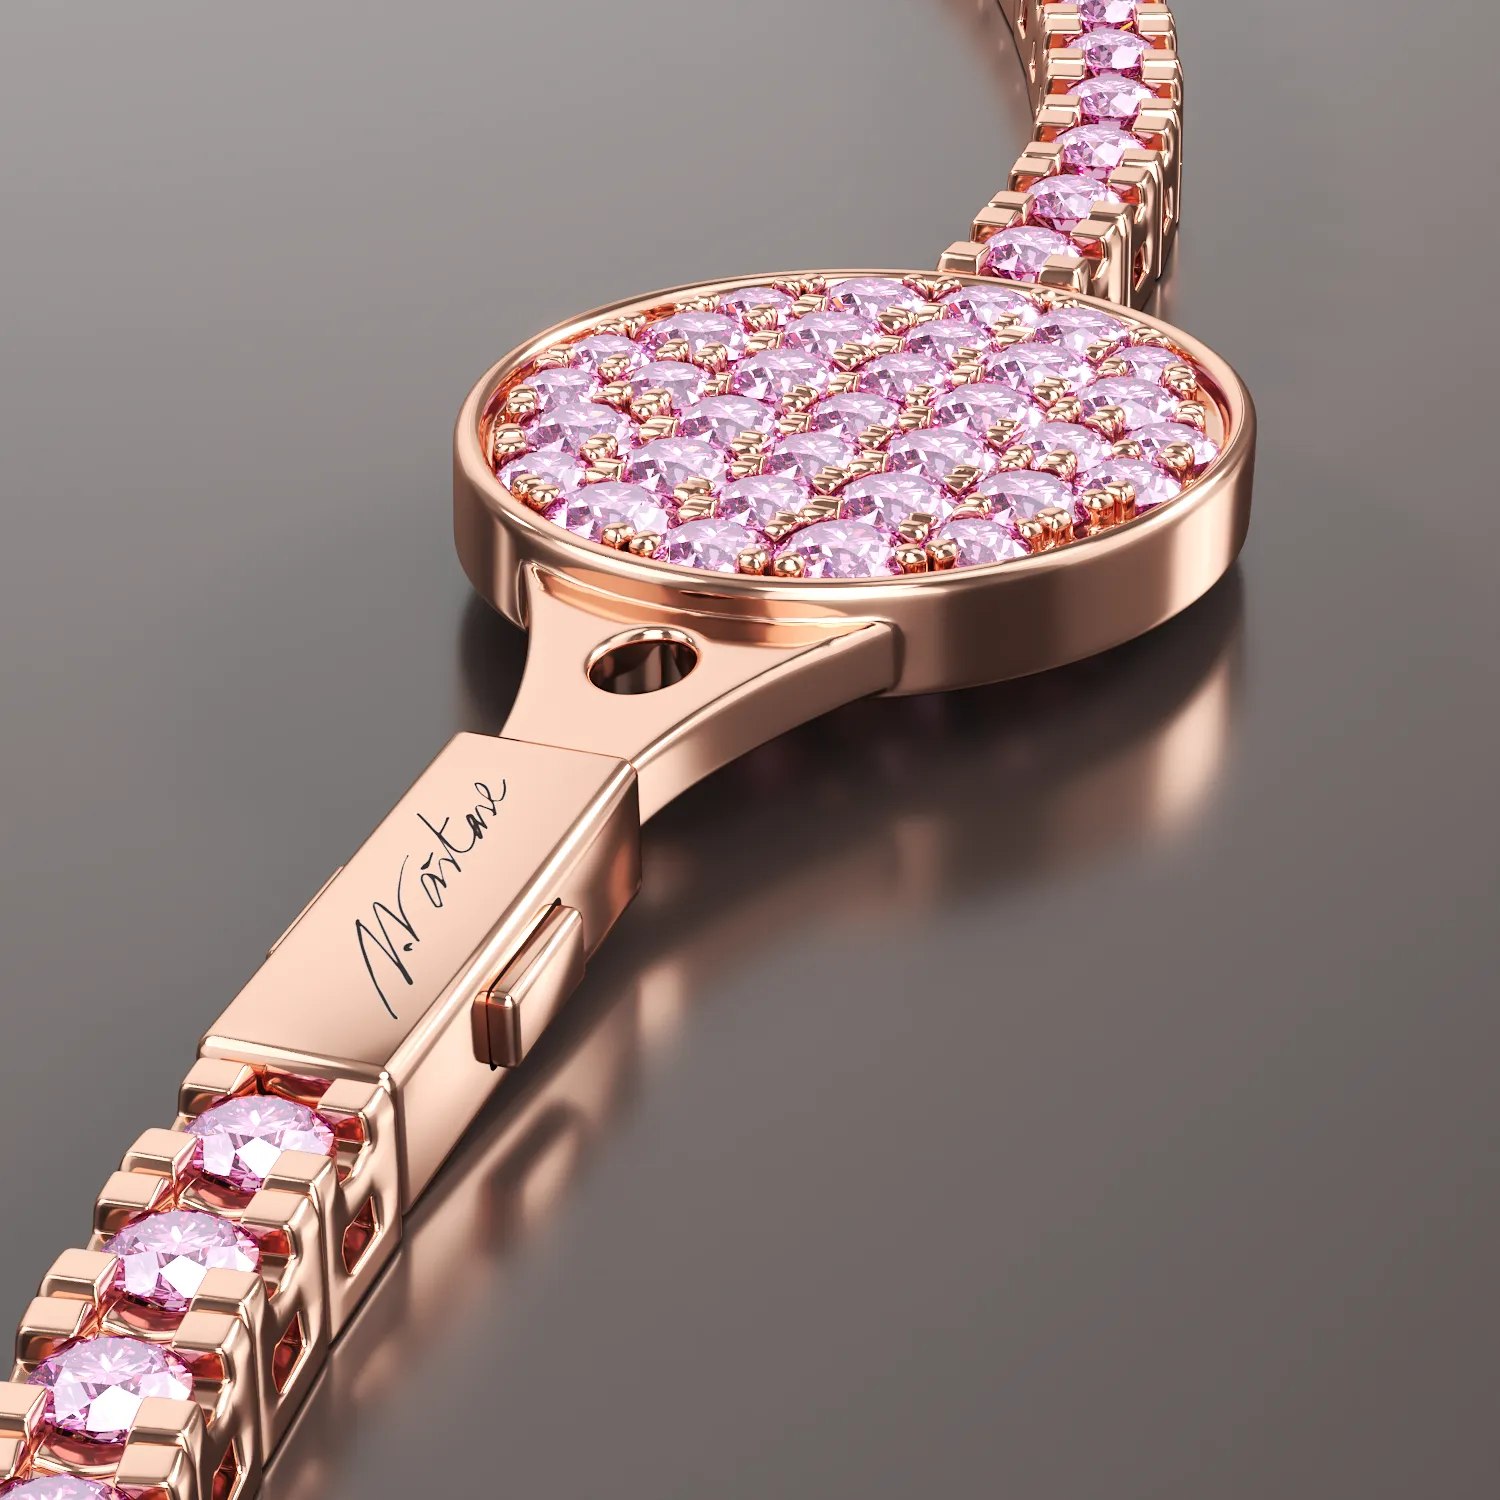 Glory tennis bracelet with 1.681ct pink sapphires